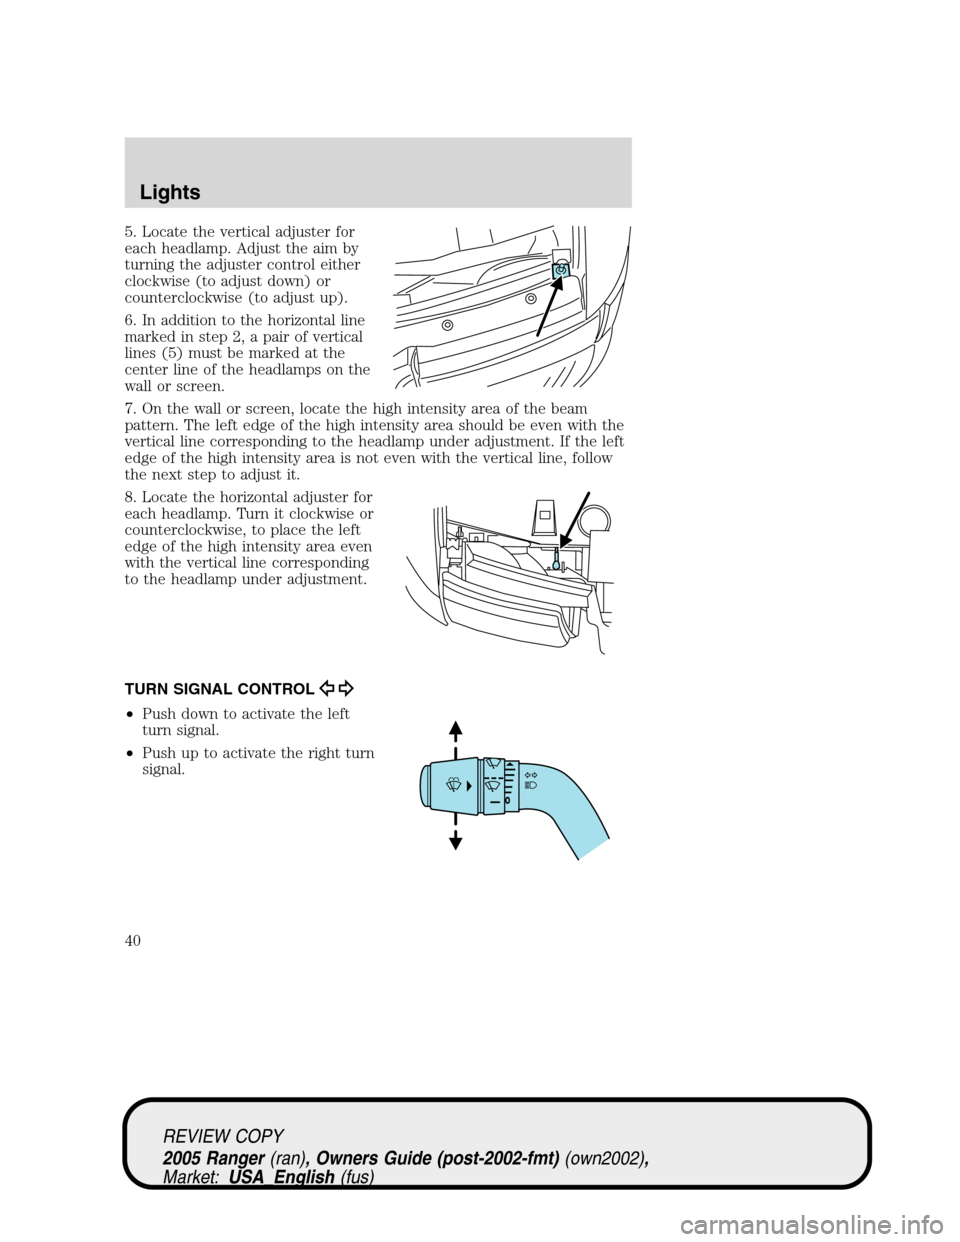 FORD RANGER 2005 2.G Owners Guide 5. Locate the vertical adjuster for
each headlamp. Adjust the aim by
turning the adjuster control either
clockwise (to adjust down) or
counterclockwise (to adjust up).
6. In addition to the horizontal